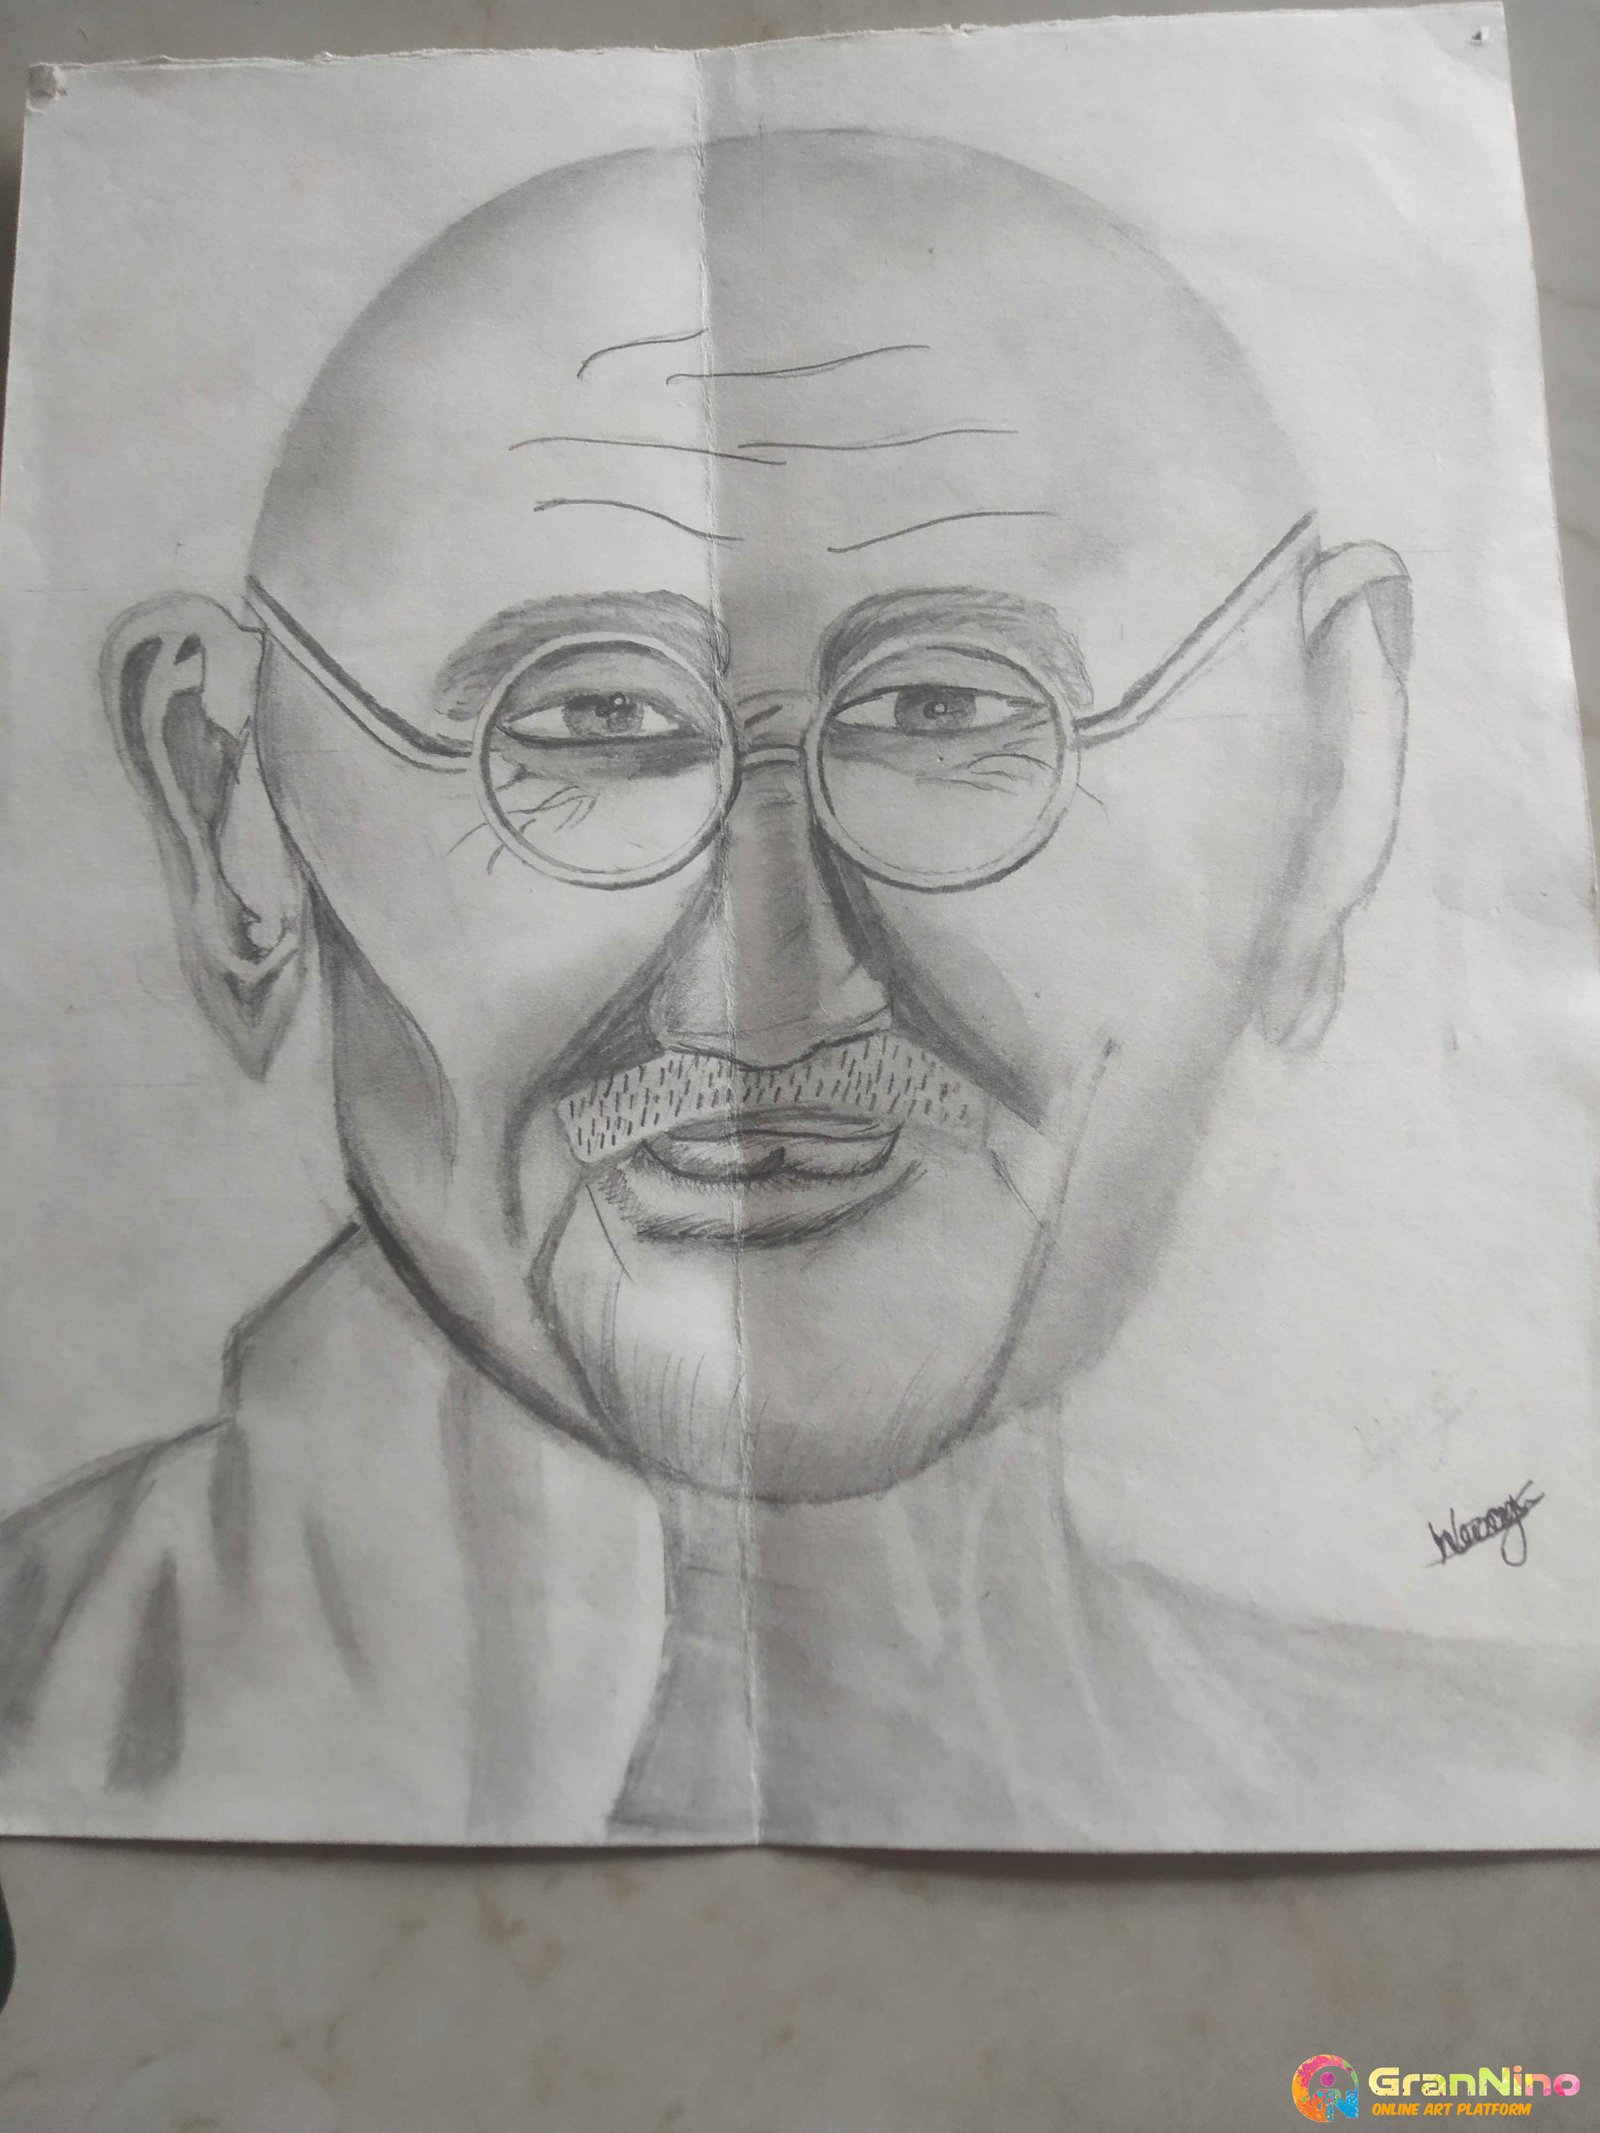 Remembering Gandhi ji: An Exhibition of Charcoal Sketches |